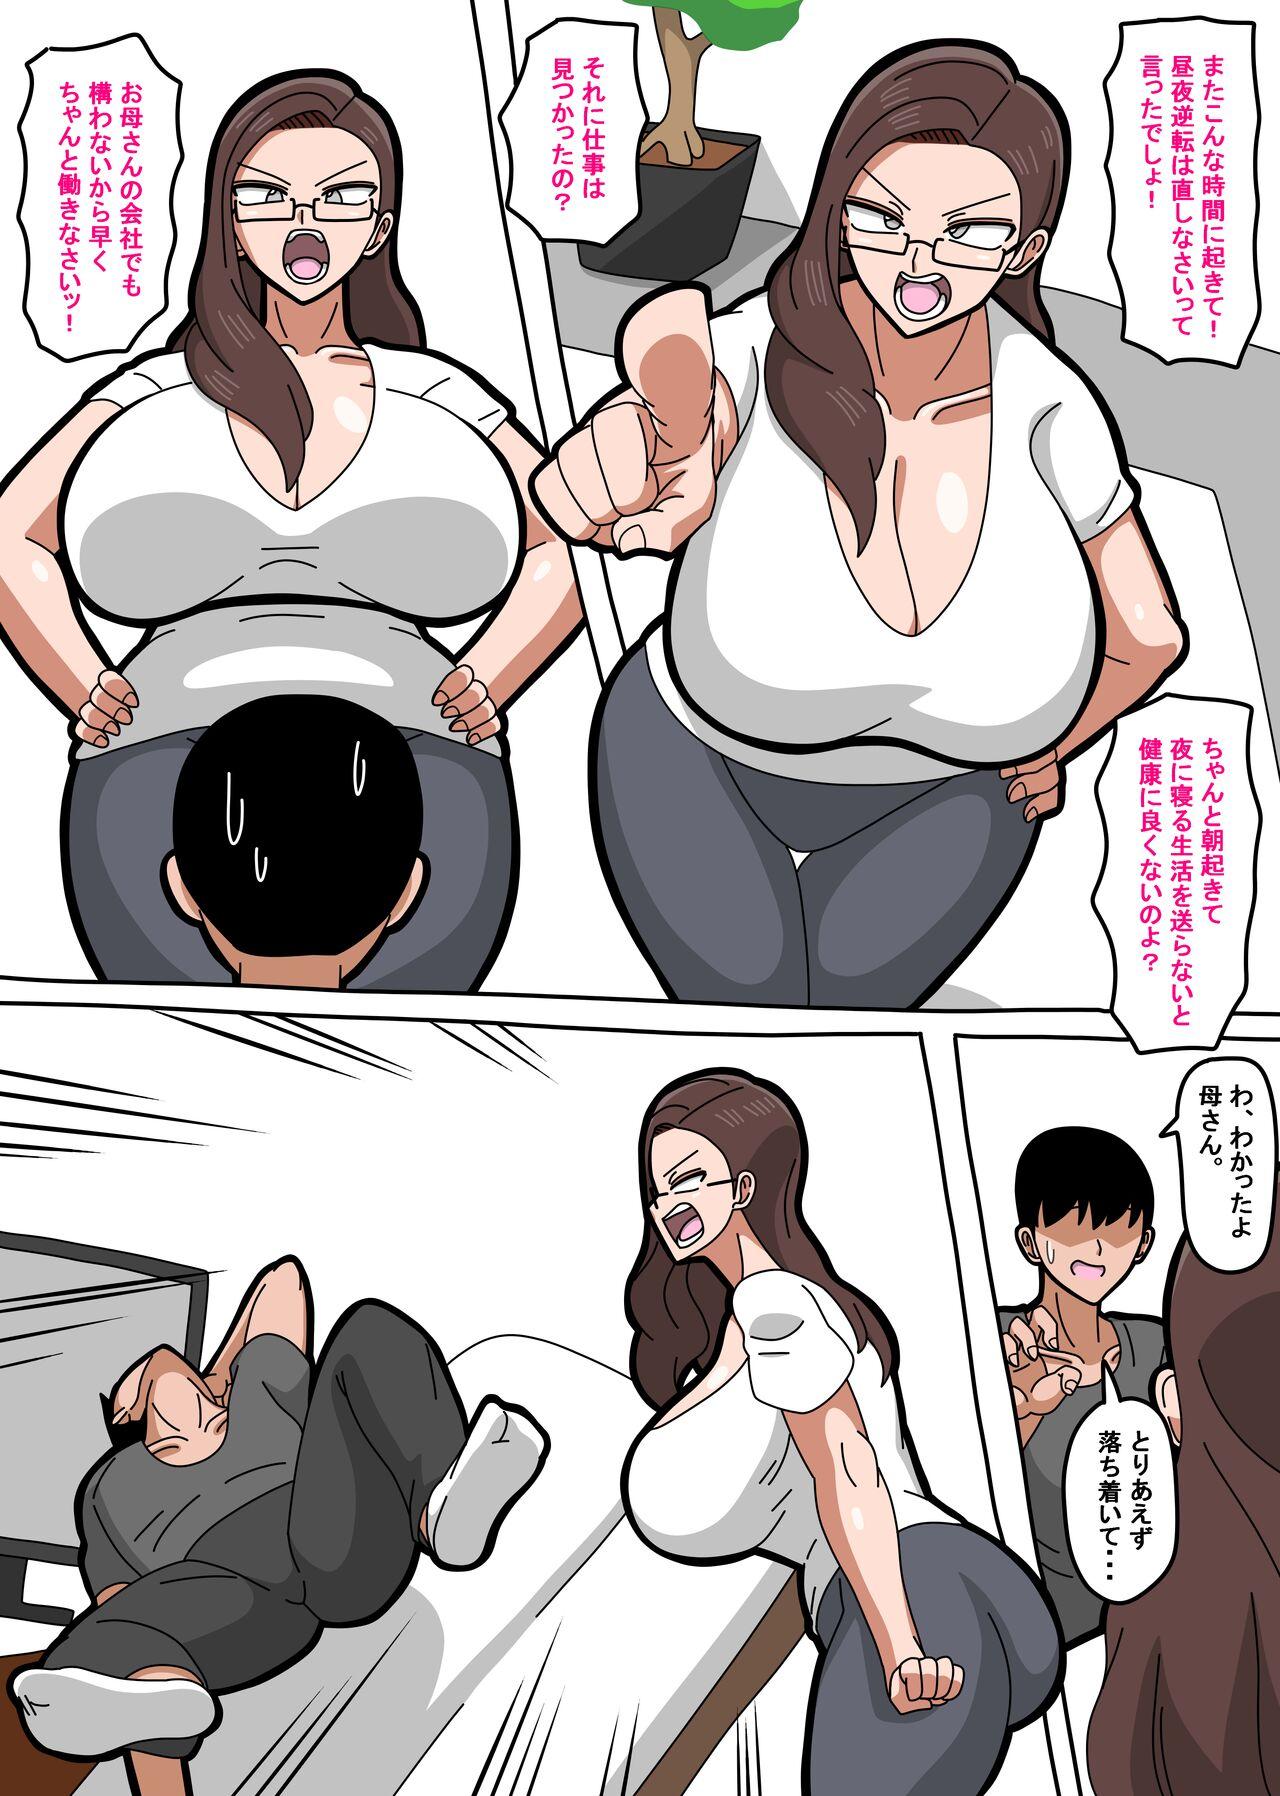 Foot 母さんは女社長 - Original Young - Page 3